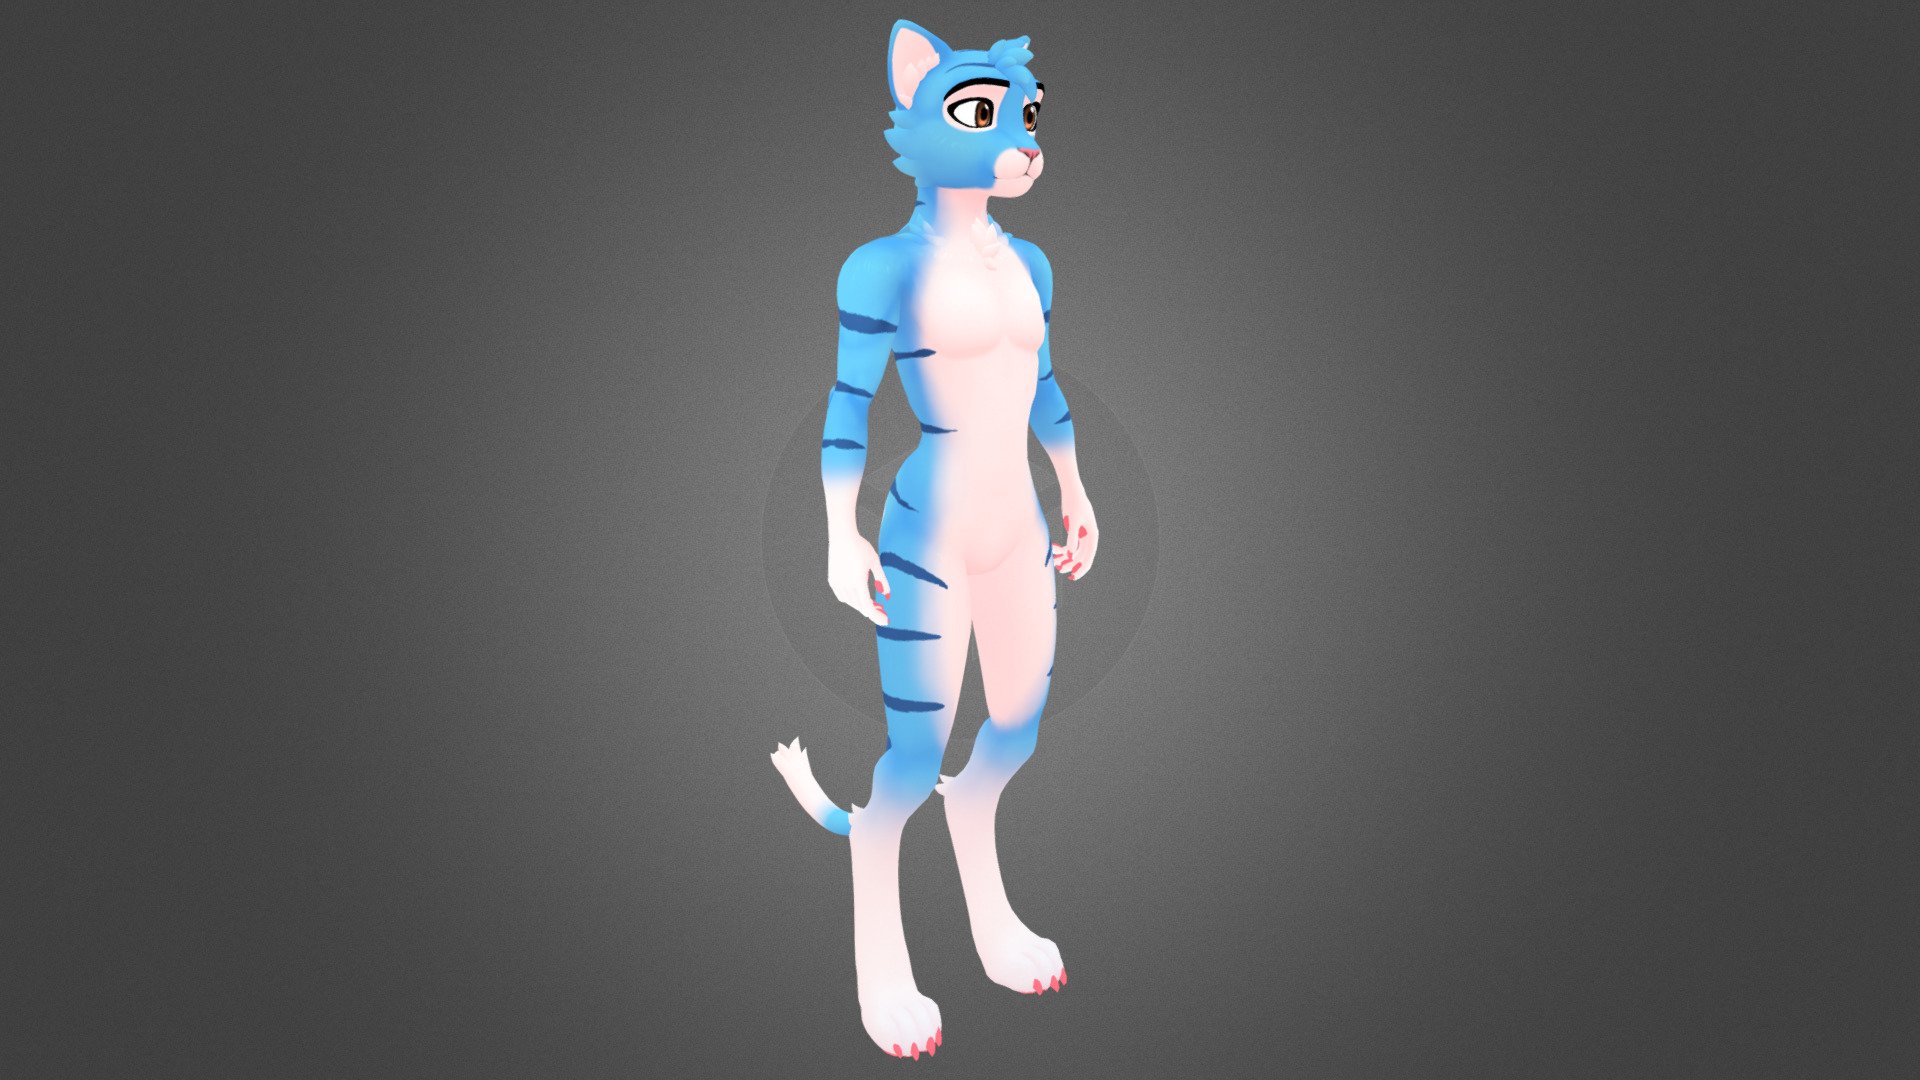 Alternate version available over here &gt; https://skfb.ly/oxoWO

Preconfigured VRC Avatar + Blender file available on Ko-Fi here &gt; https://ko-fi.com/s/c25219f306

Also if ya like this model feel free to leave a tip via kofi! https://ko-fi.com/skye0811

Set up for VRChat. Feel free to use in any way (With the exception of any of that nft/crypto/blockchain related nonsense) Just remember to credit me in some way 3d model